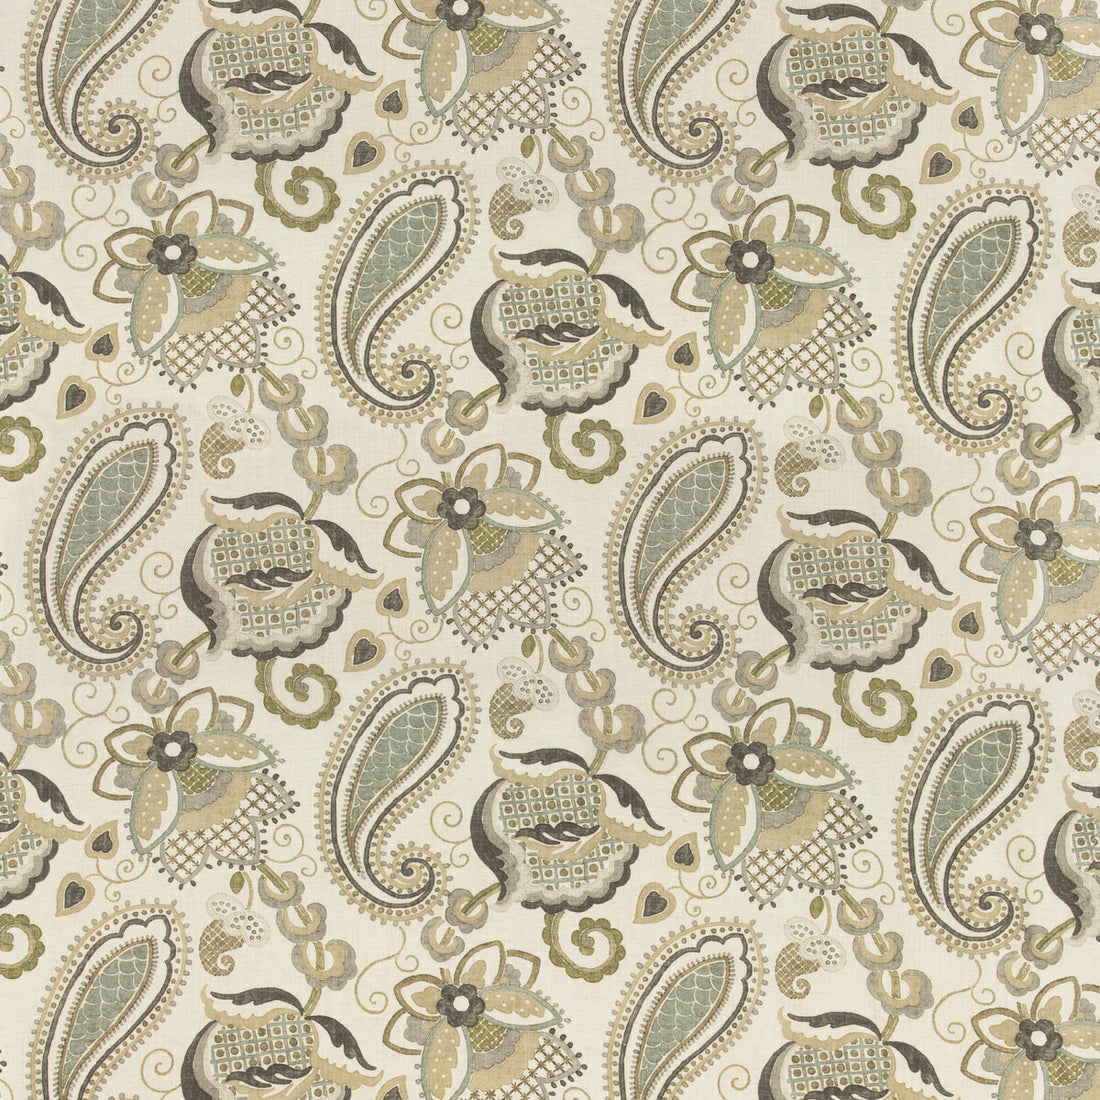 Kravet Basics fabric in infusion-316 color - pattern INFUSION.316.0 - by Kravet Basics